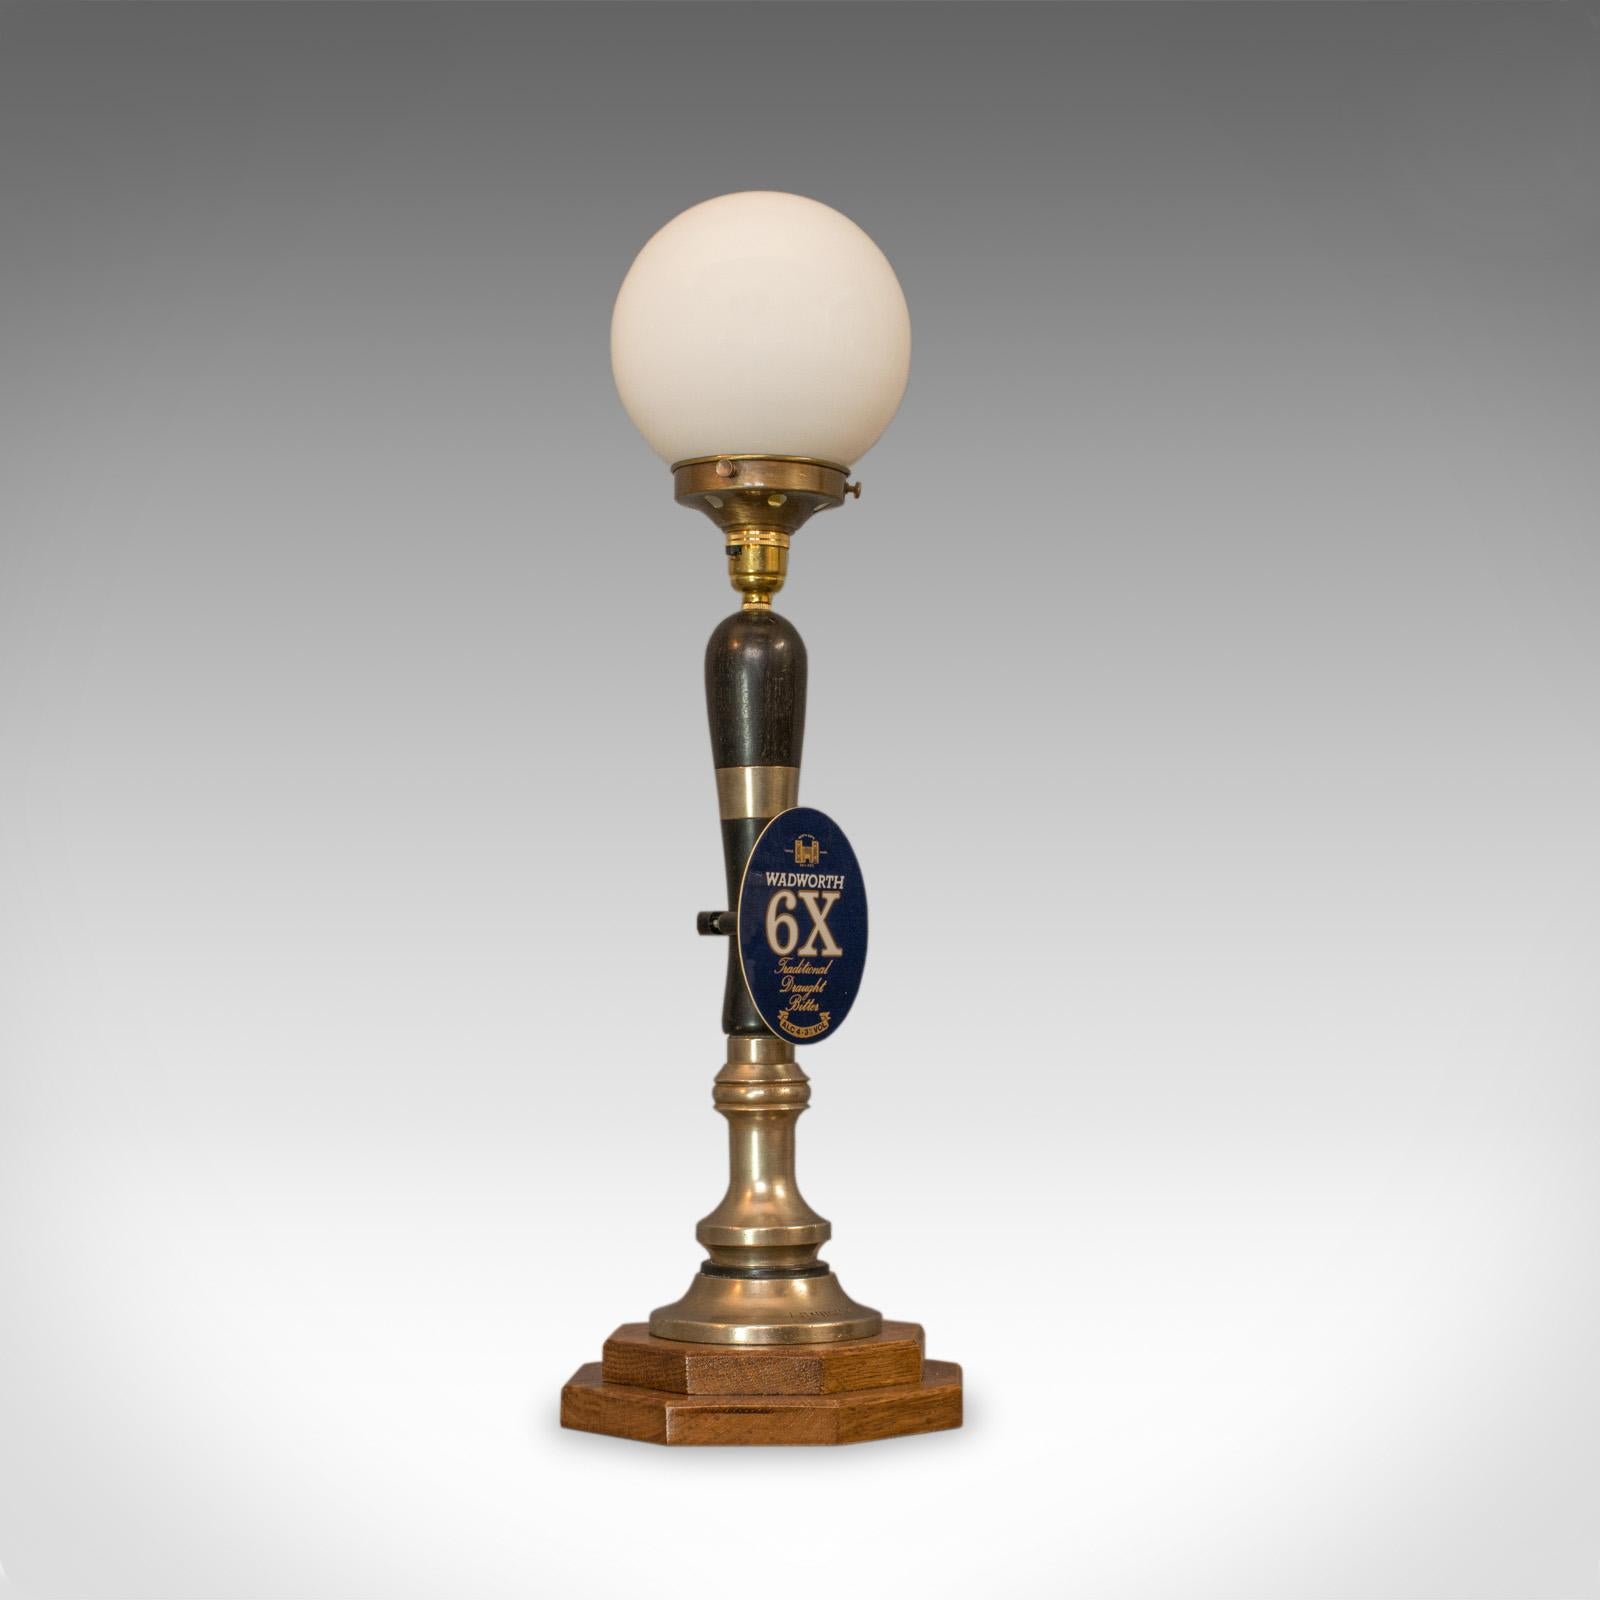 This is a vintage beer pump lamp. An English, bespoke handcrafted public house draught tap table light with an opaque, glass light shade.

In excellent condition, fully working with quality, opaque pendant lamp shade
Replete with genuine Wadworth